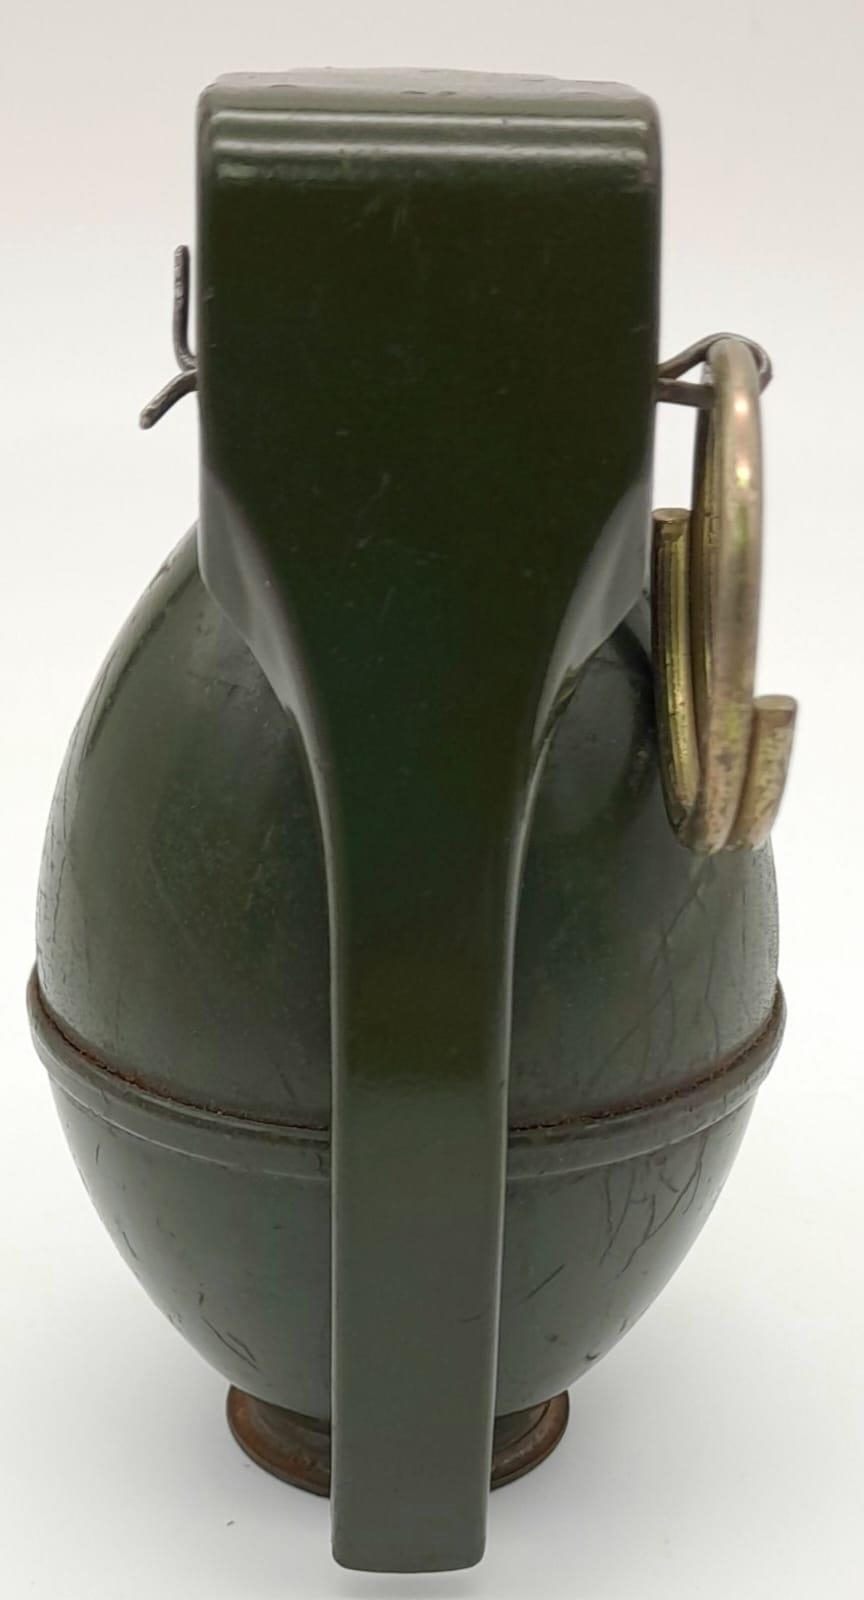 INERT Vietnam War Era US M26 hand grenade. The grenade with a smooth casing and a single rib along - Image 3 of 4